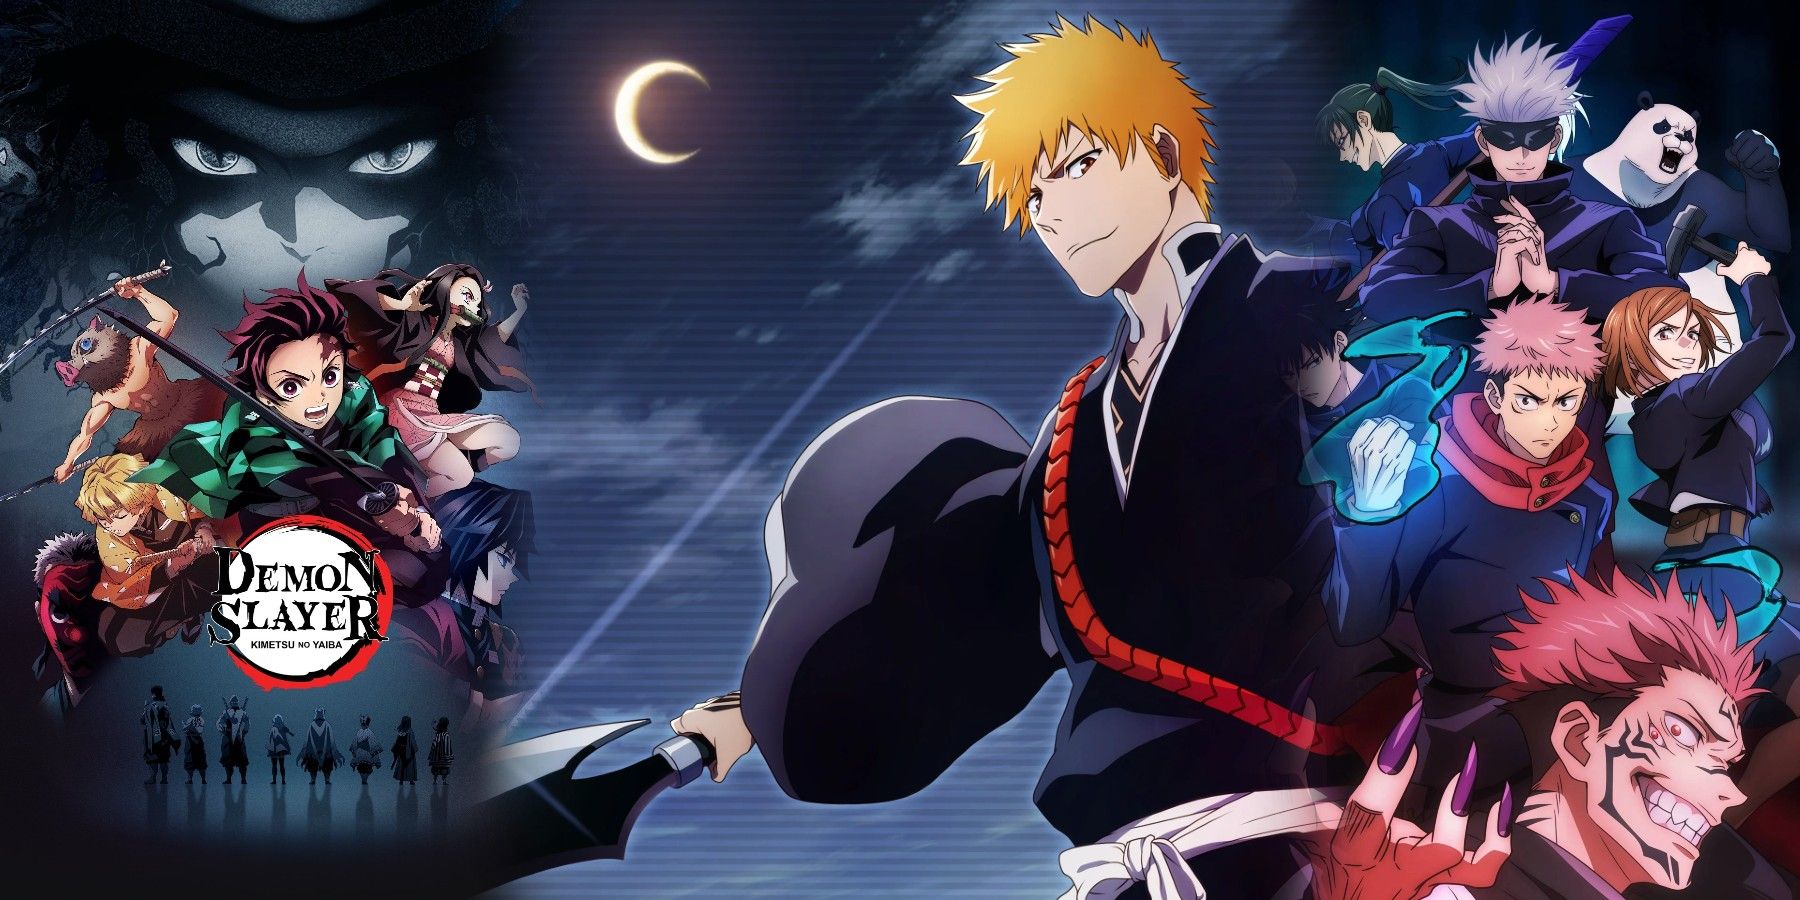 How Did Bleach Influence Current Manga and Anime?